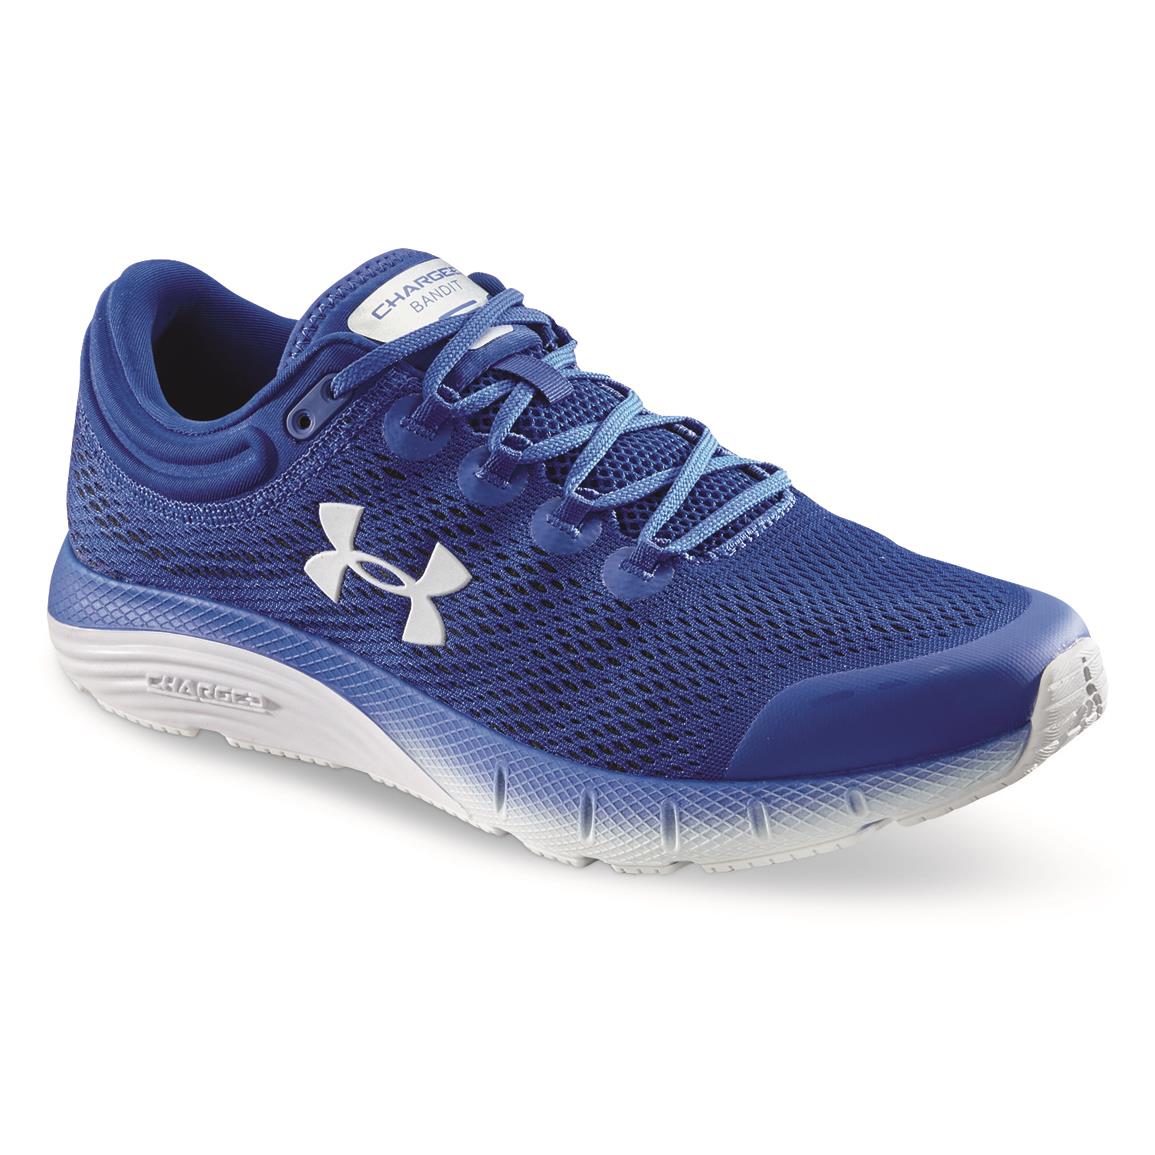 under armour white tennis shoes